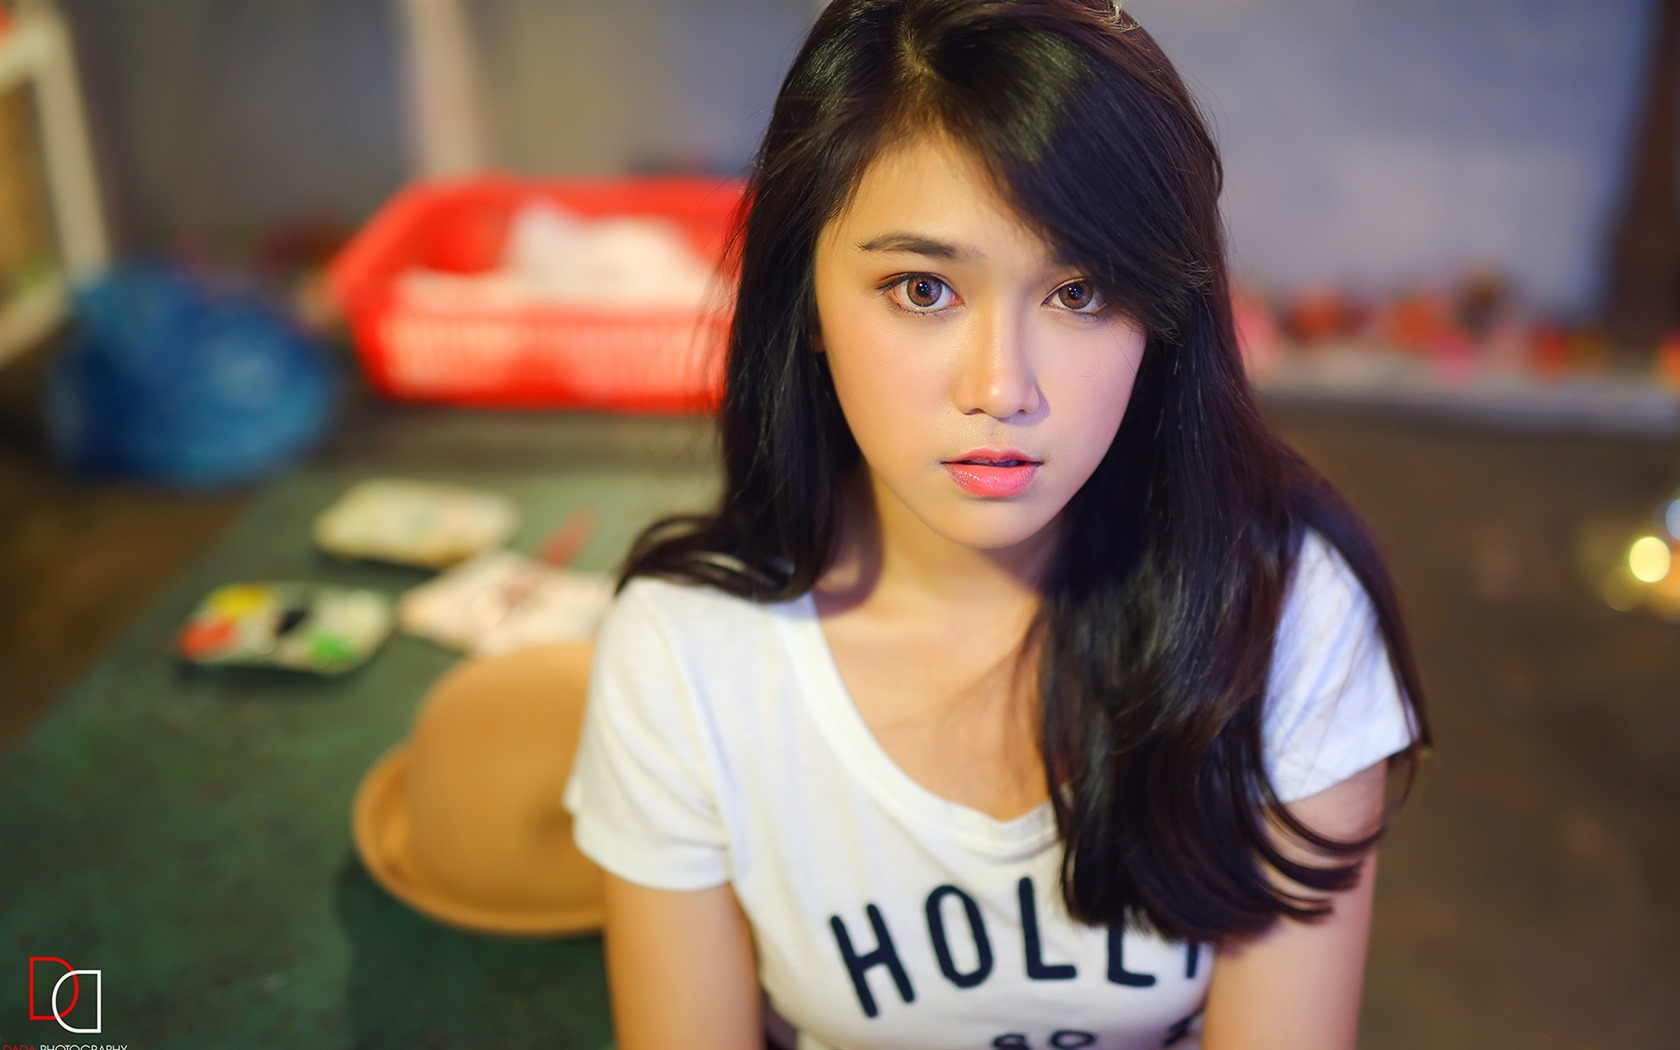 Pure and lovely young Asian girl HD wallpapers collection (3) #40 - 1680x1050